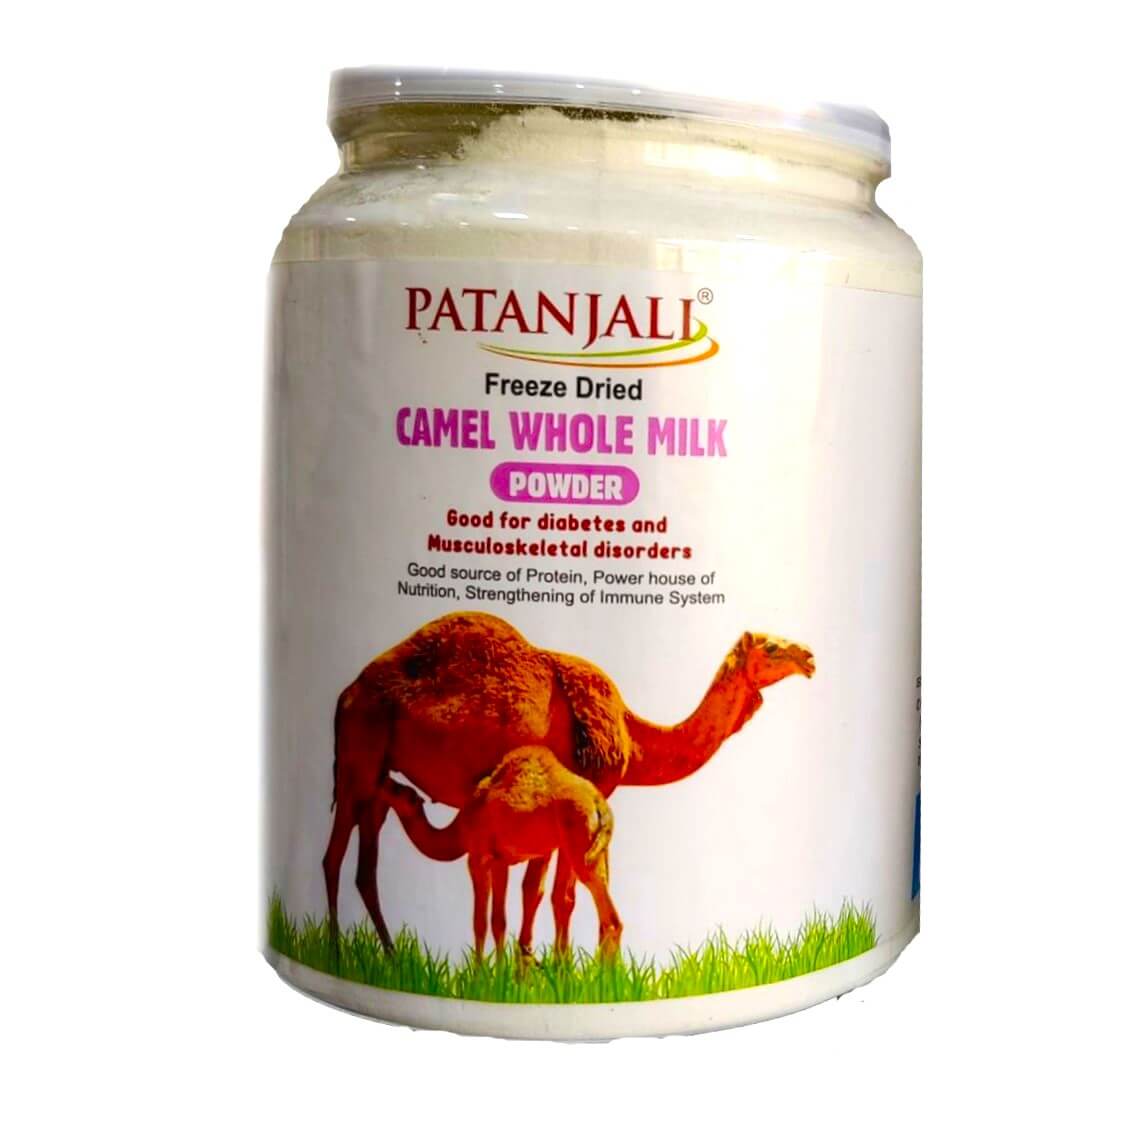 Buy Patanjali Camel Whole Milk Powder 500 g online at Lowest Price in India